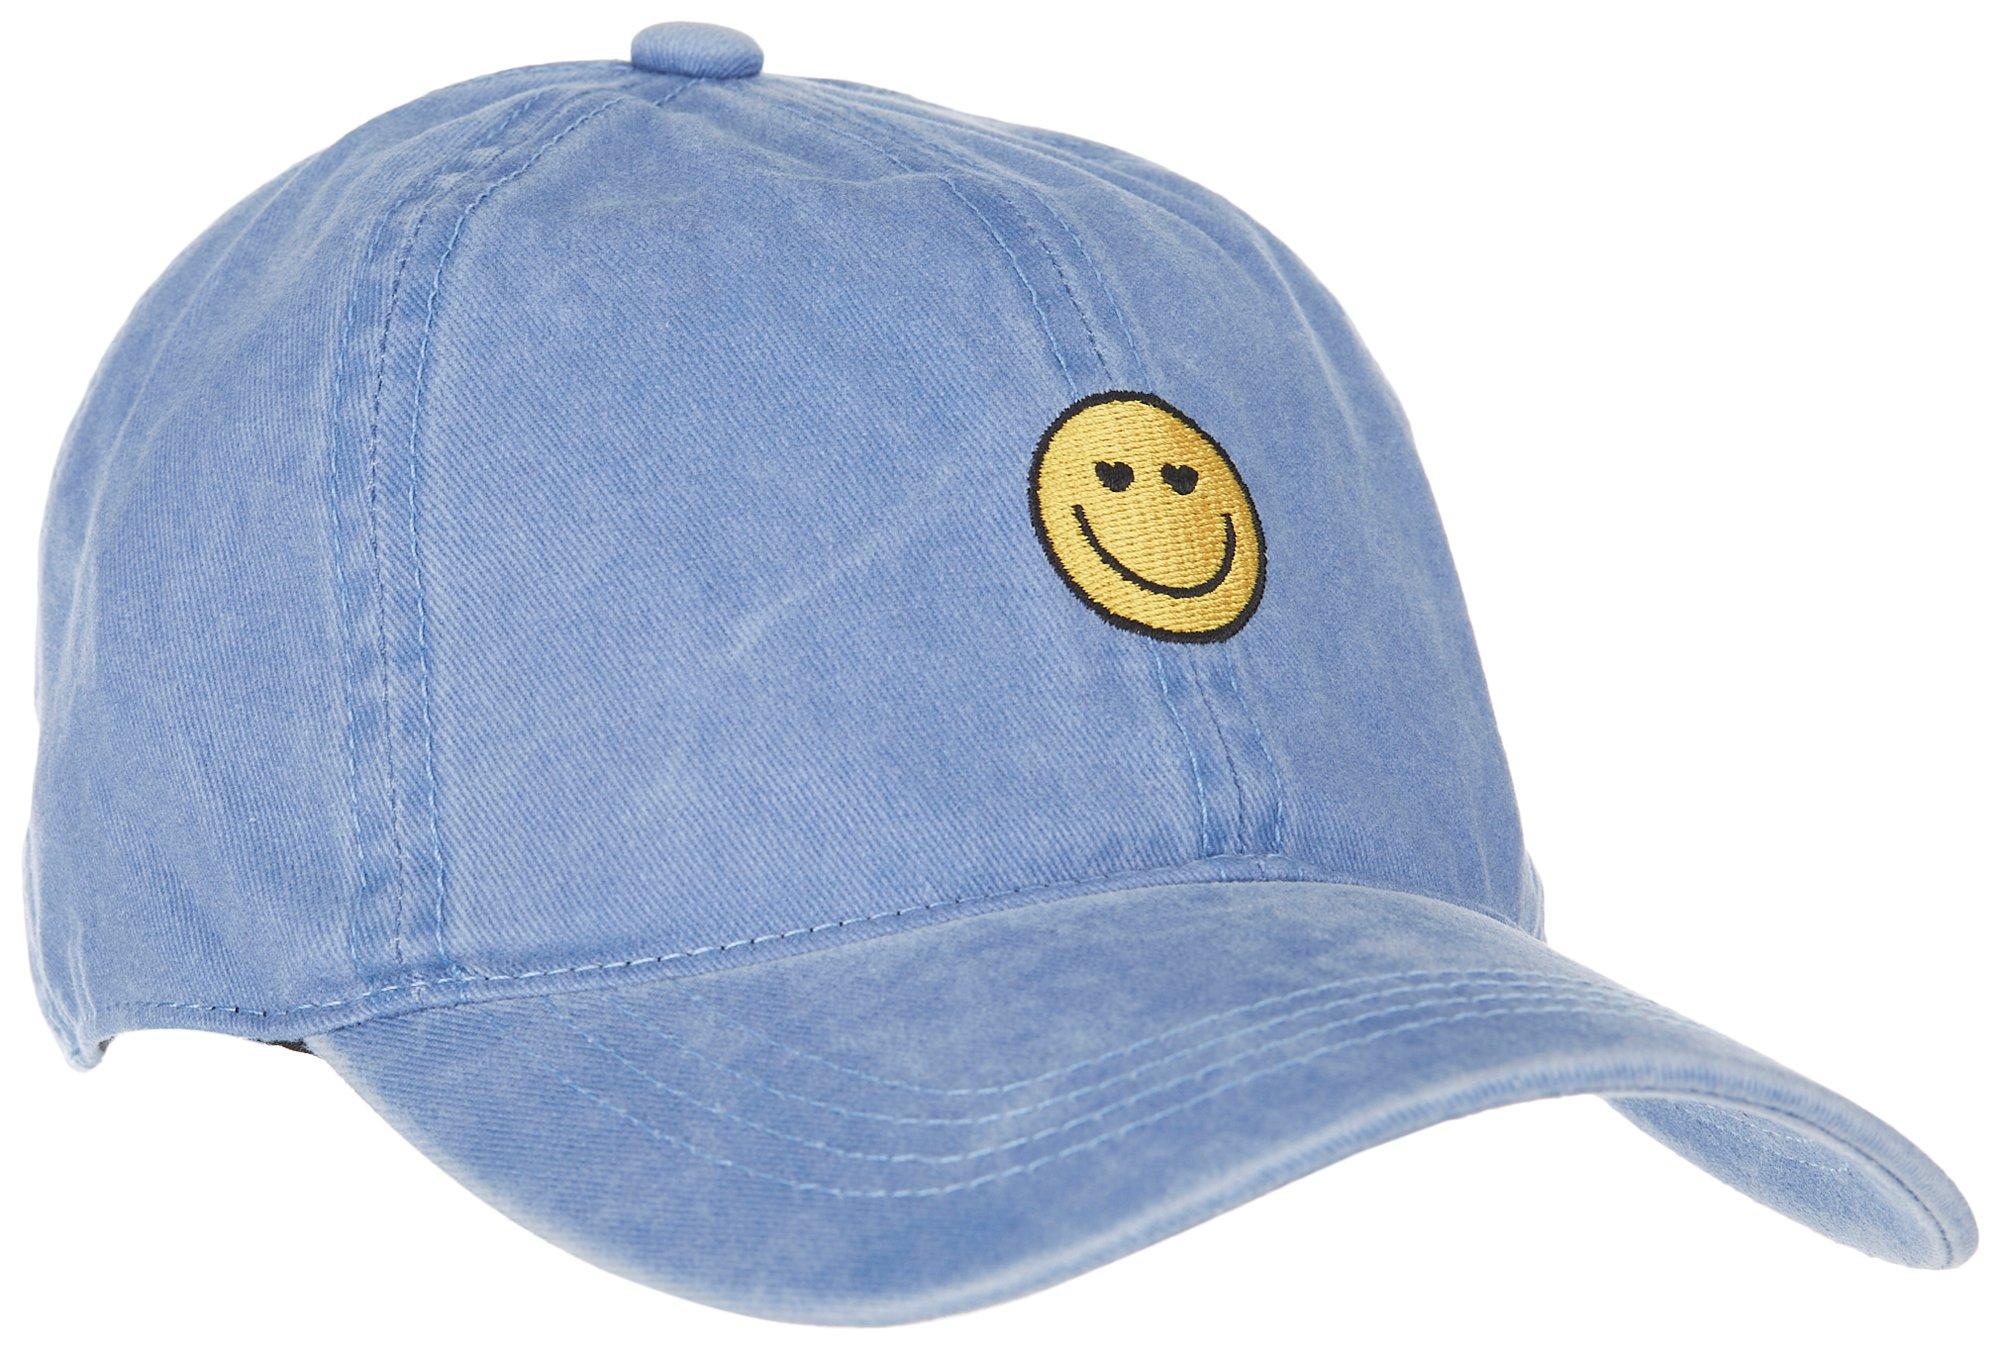 Womens Embroidered Smiley Baseball Hat